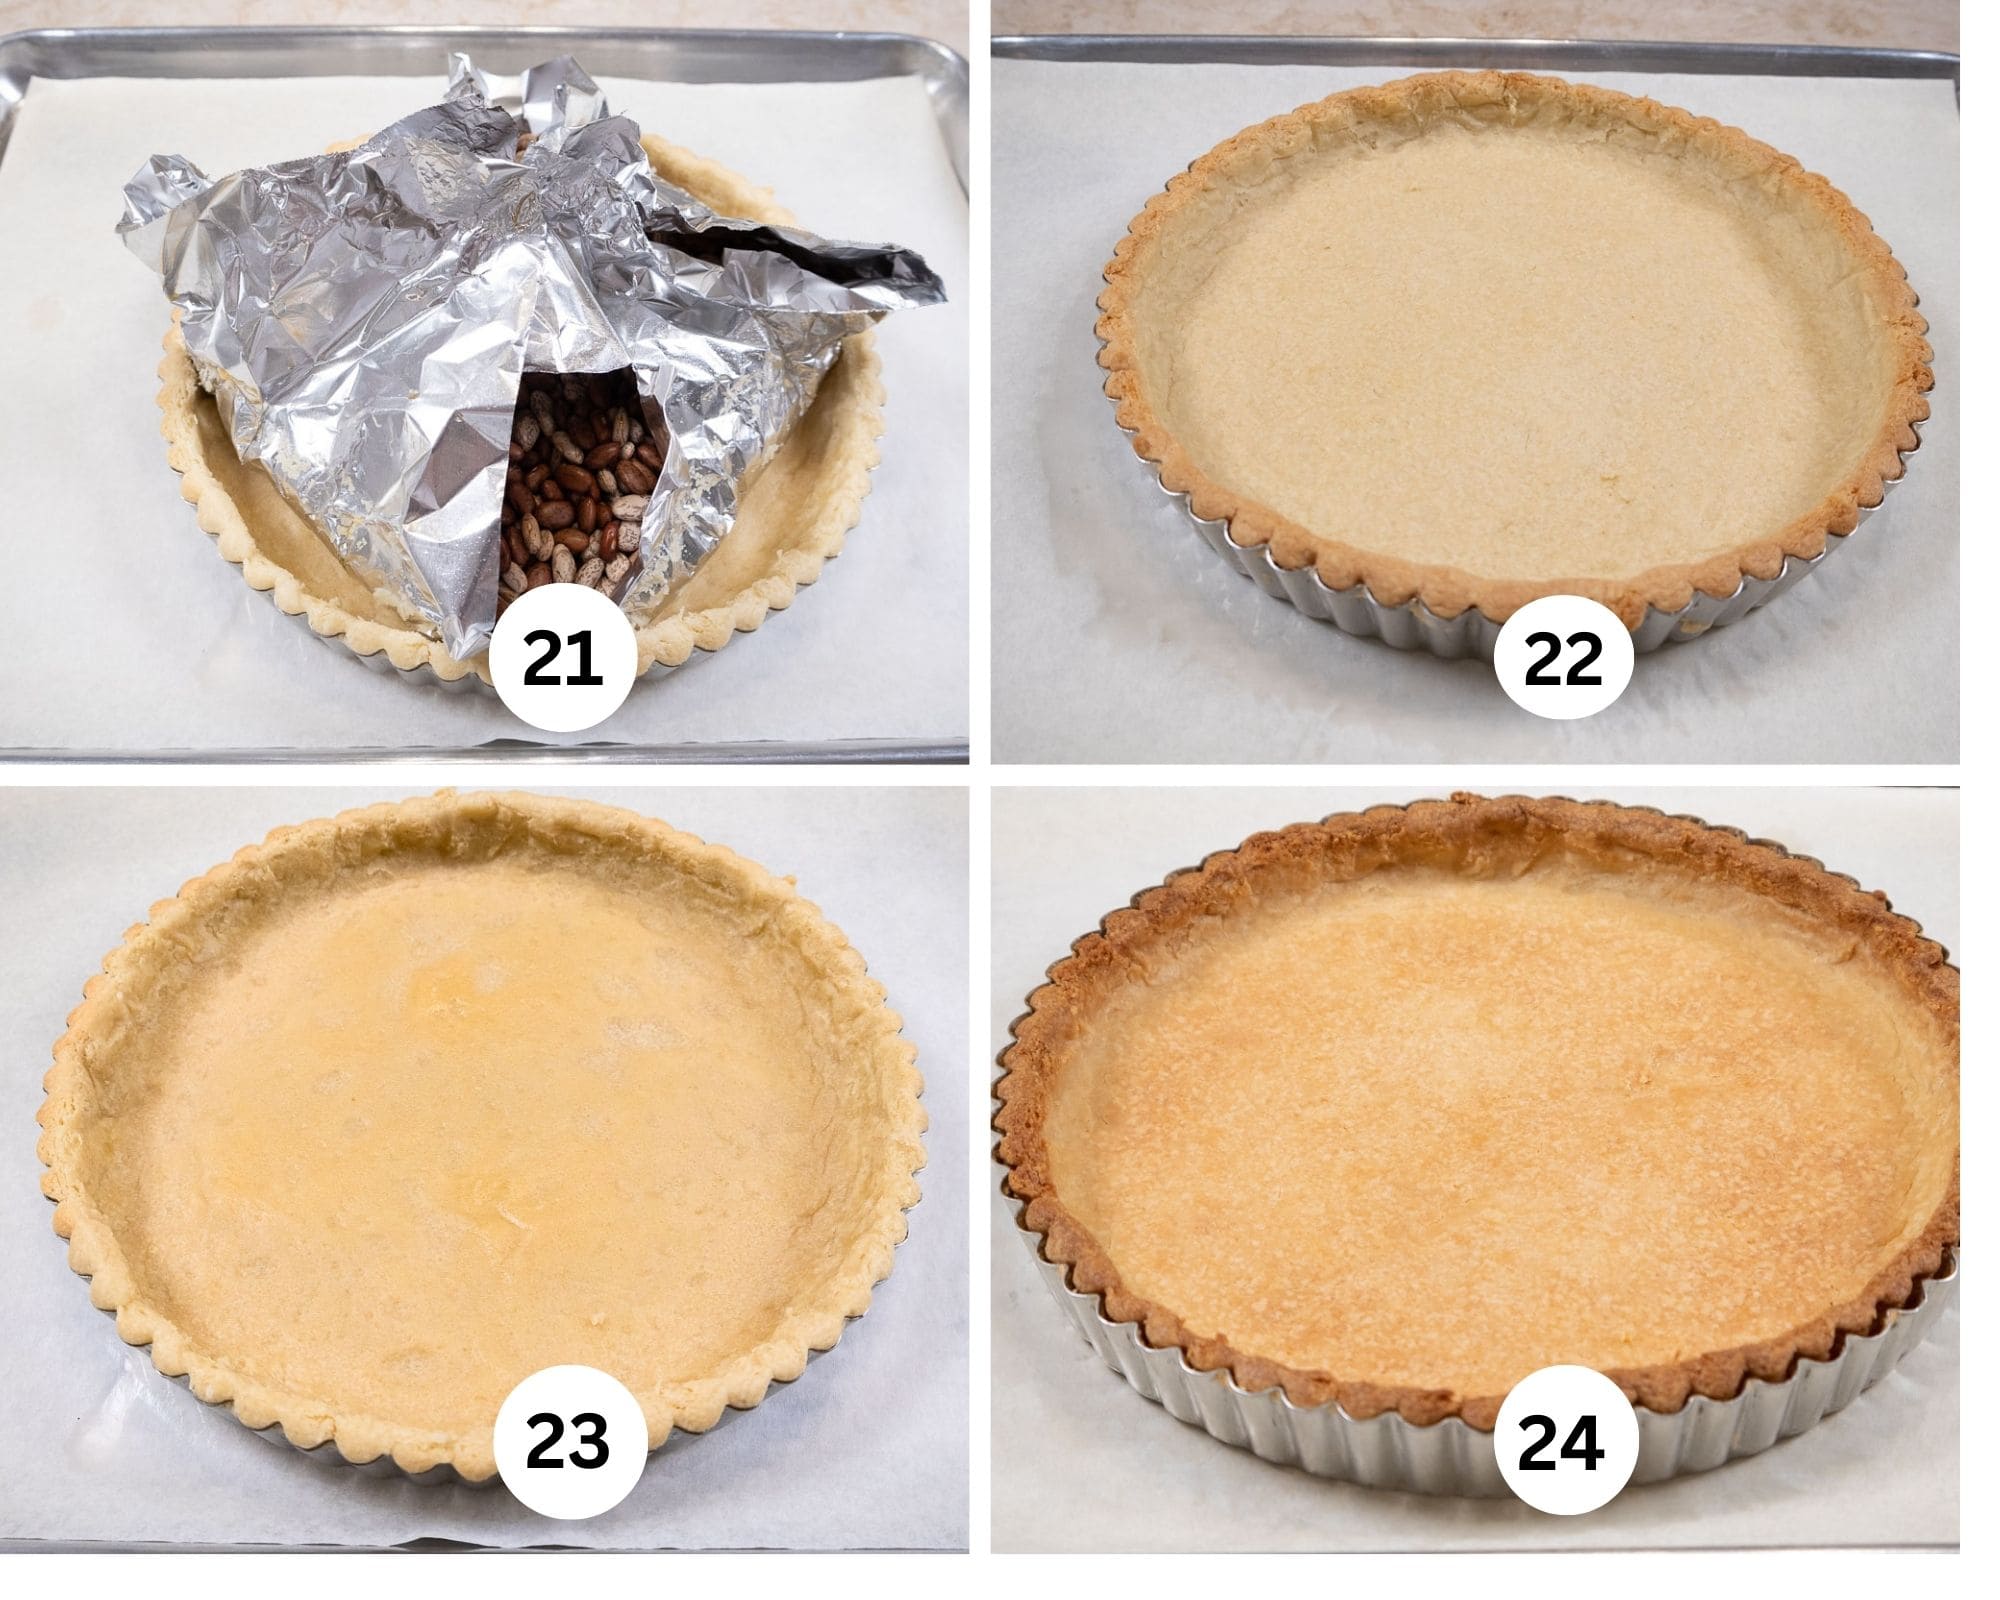 The final collage shows the weights being removed from the pastry, the pastry after the beans are removed, the partially baked shell and the completely baked shell.